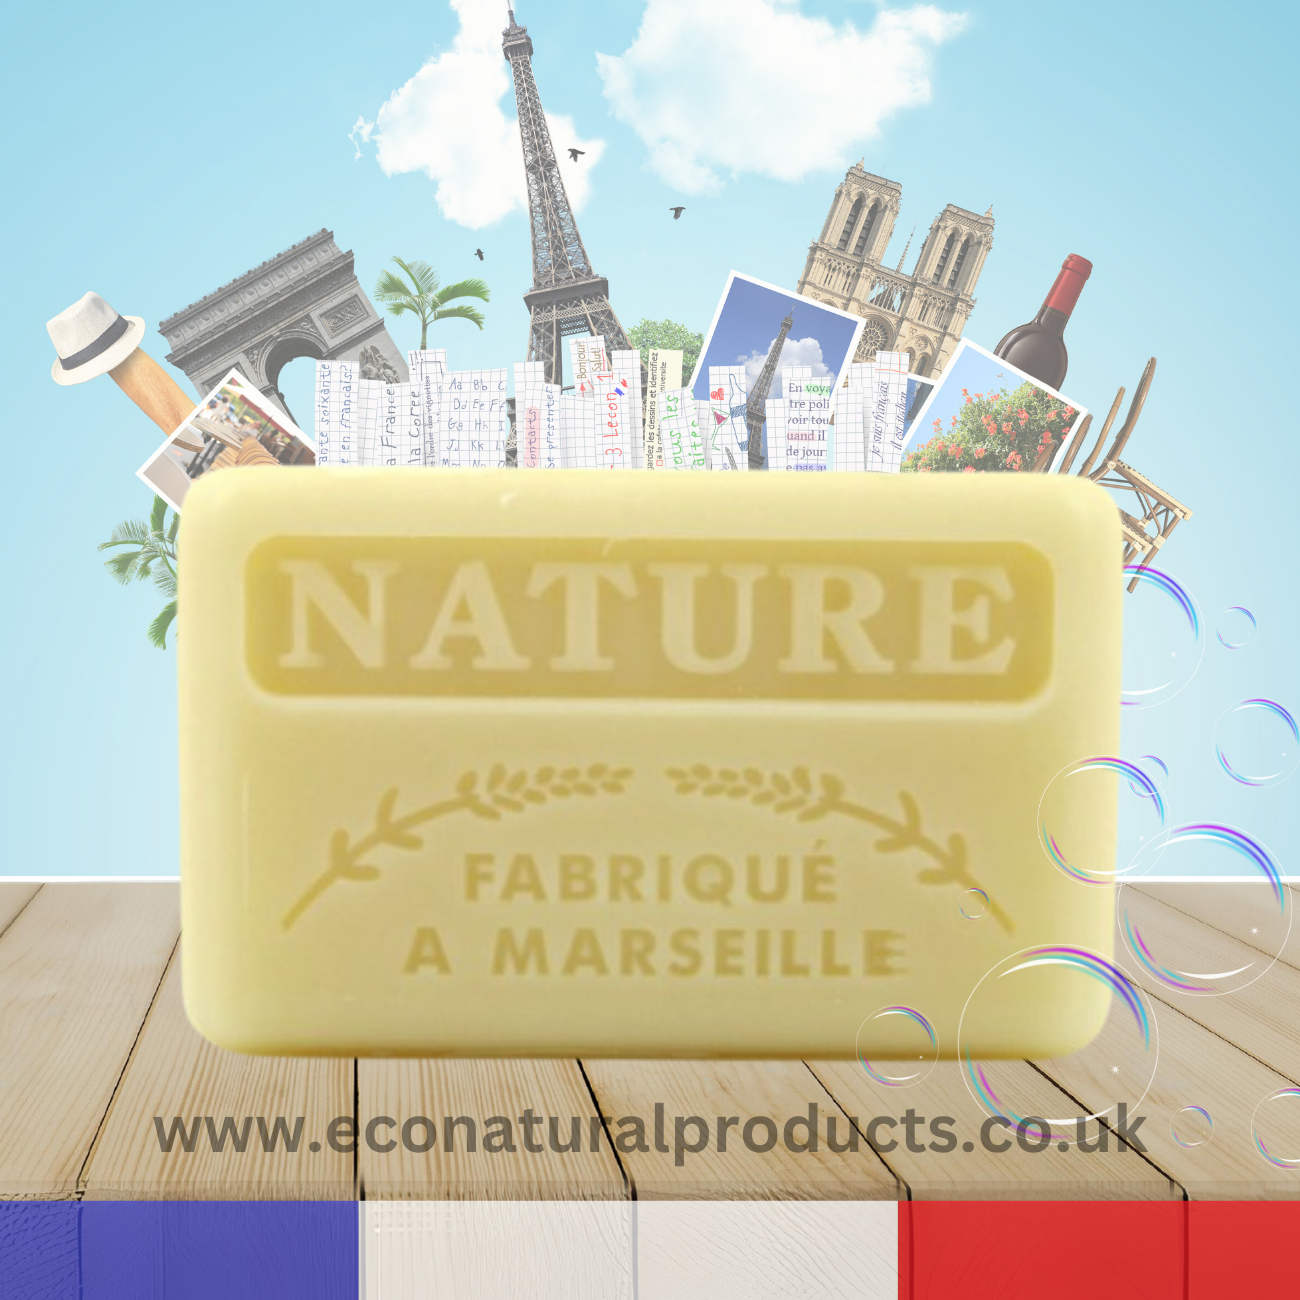 French Marseille Soap Nature 125g